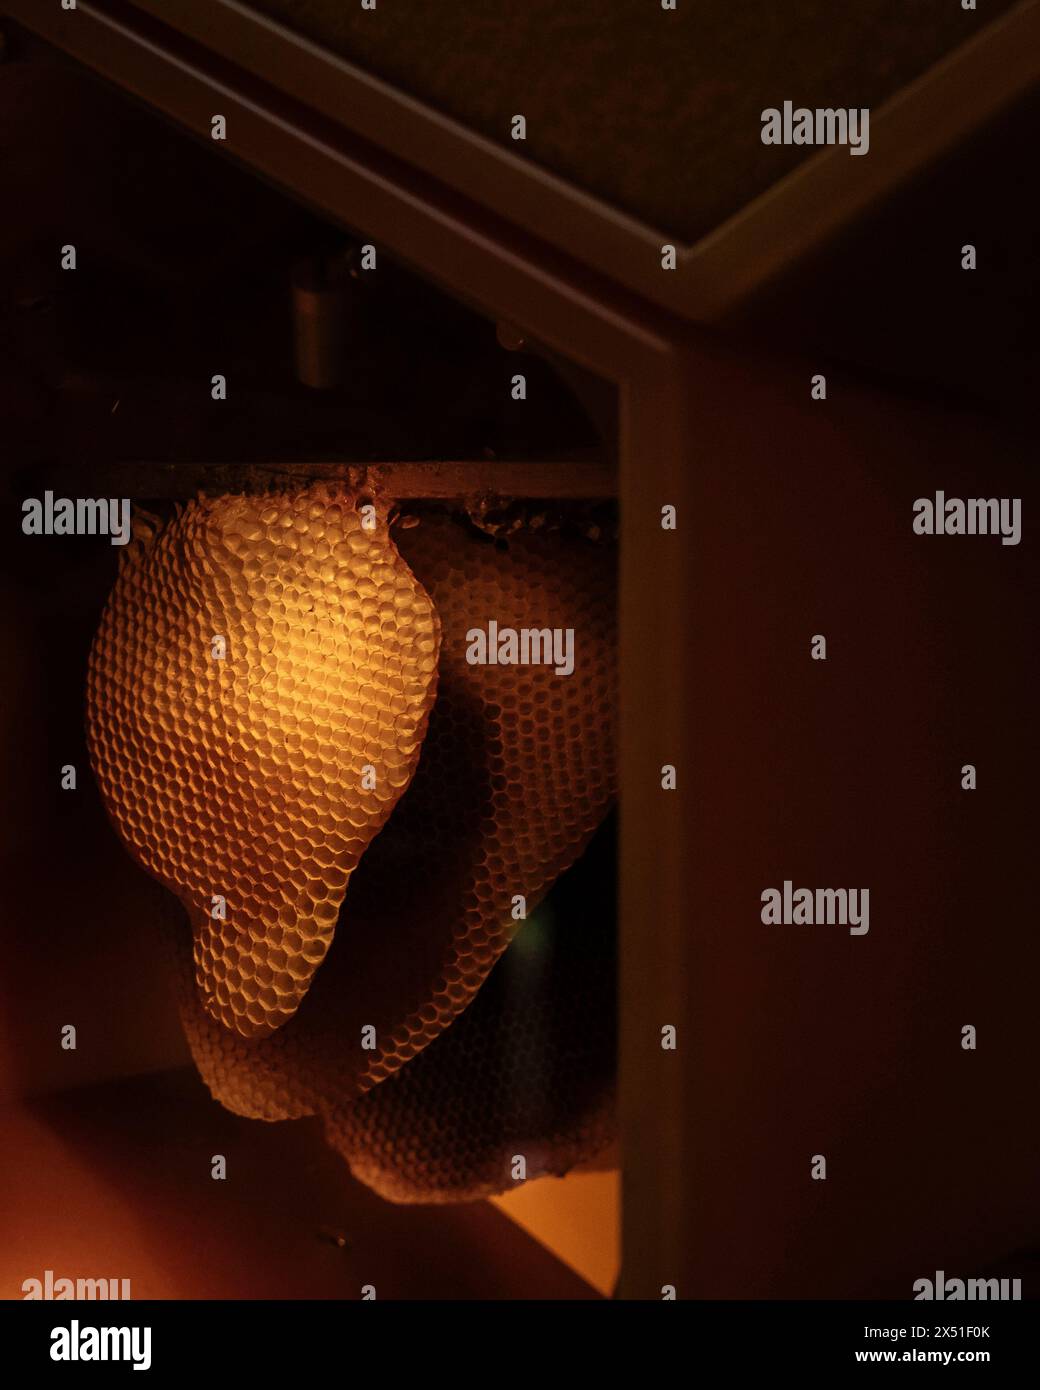 Golden honeycomb is seen through a viewing case. The Beezantium at The Newt, Bruton, United Kingdom. Architect: Invisible Studio, 2021. Stock Photo